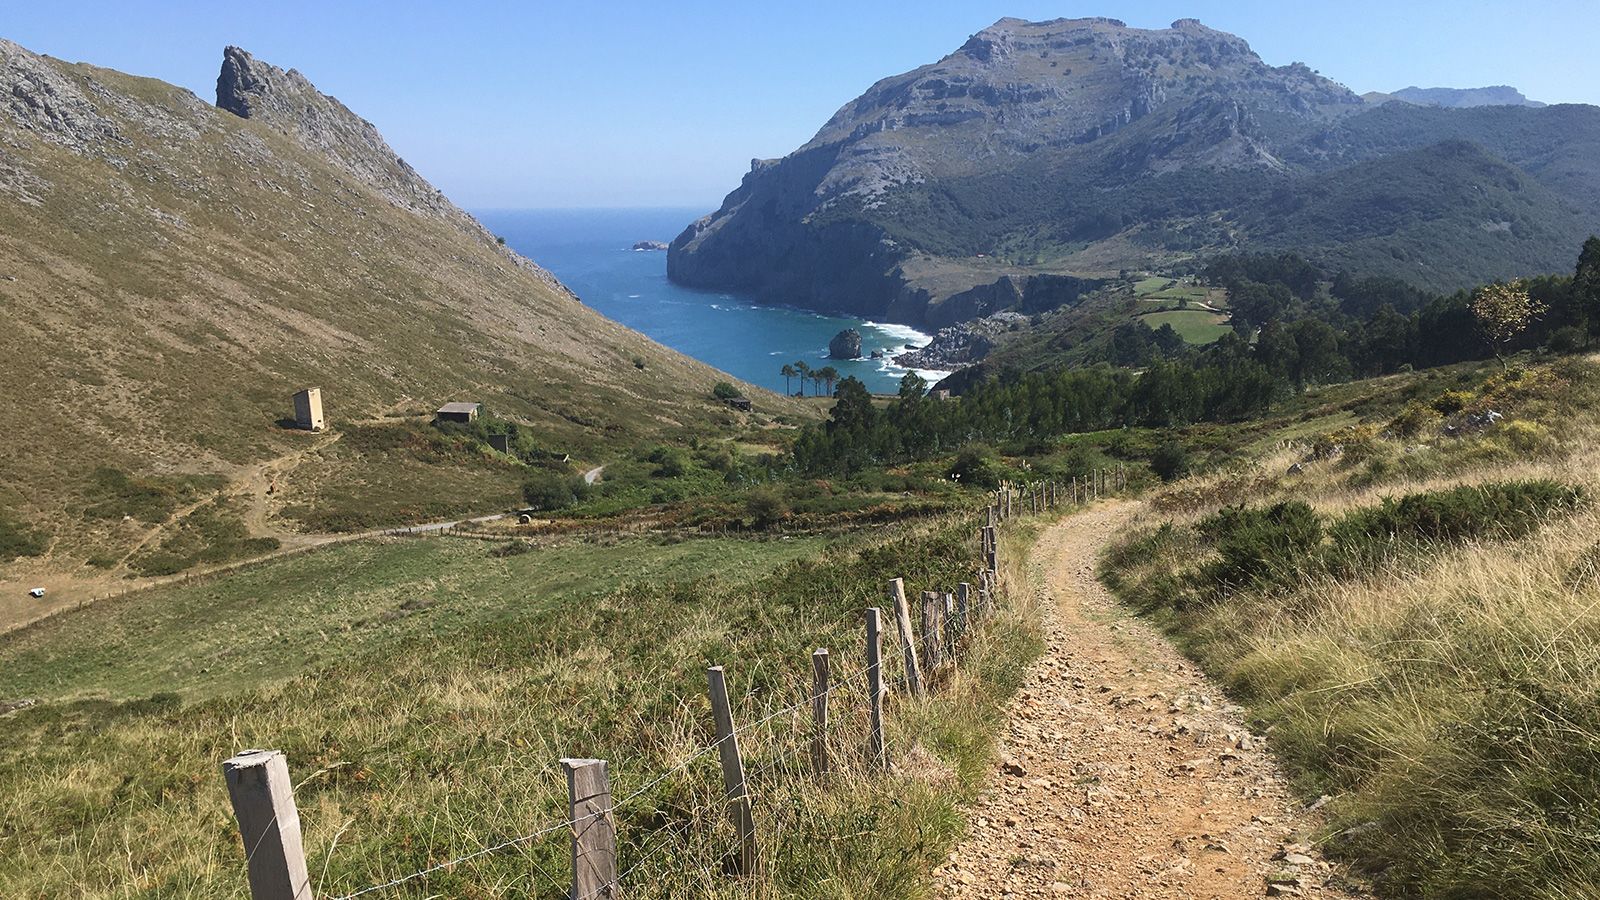 Lessons learned from hiking the Camino de Santiago in Spain and Portugal